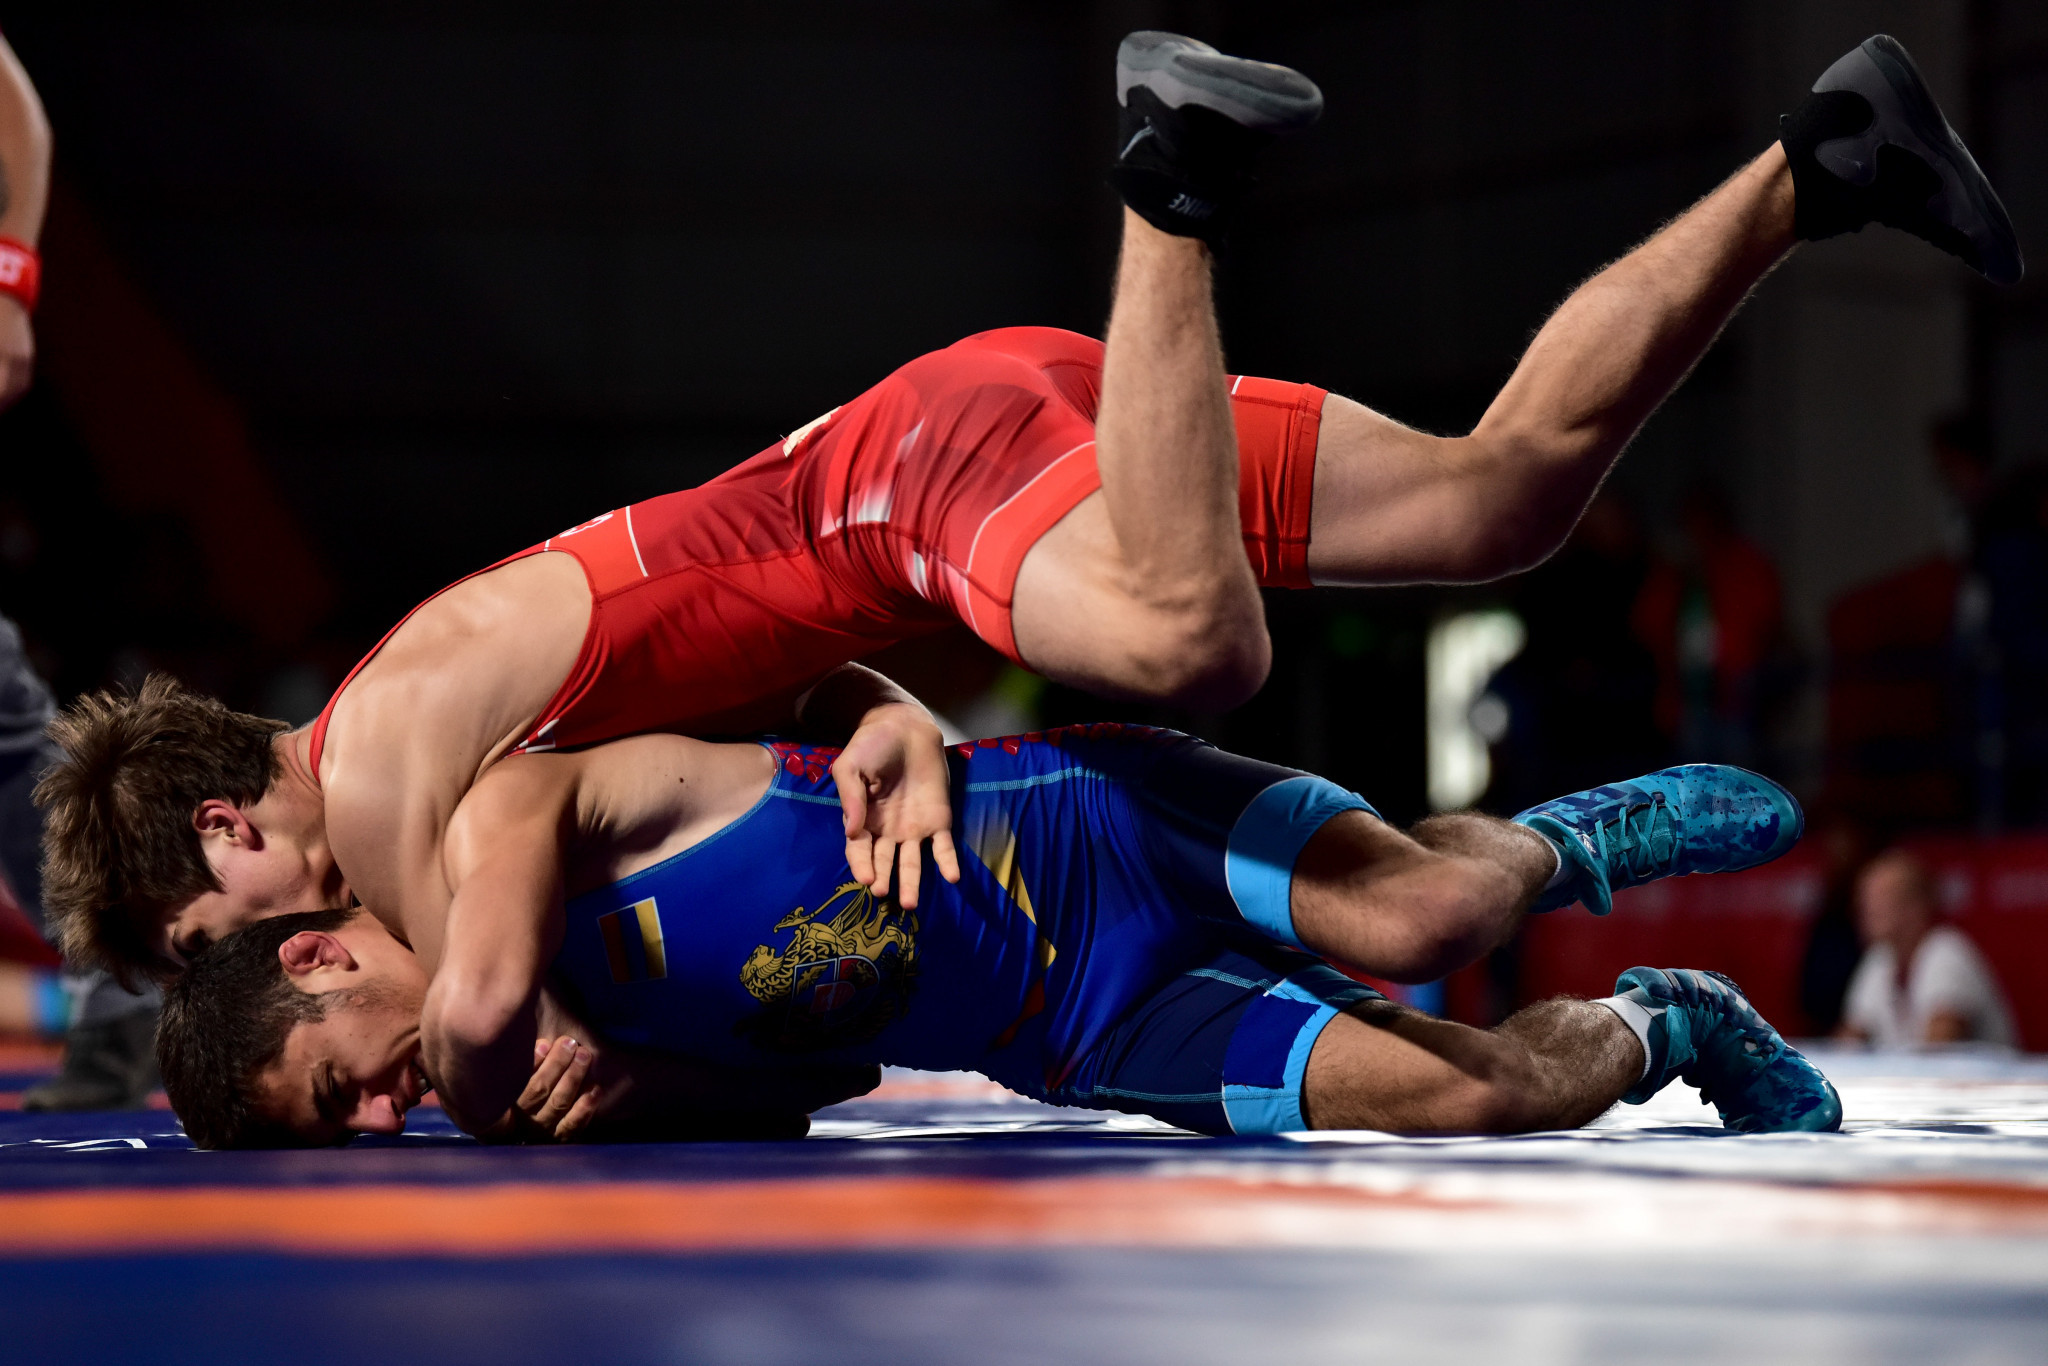 UWW offers financial support for smaller nations to attend Olympic qualifiers